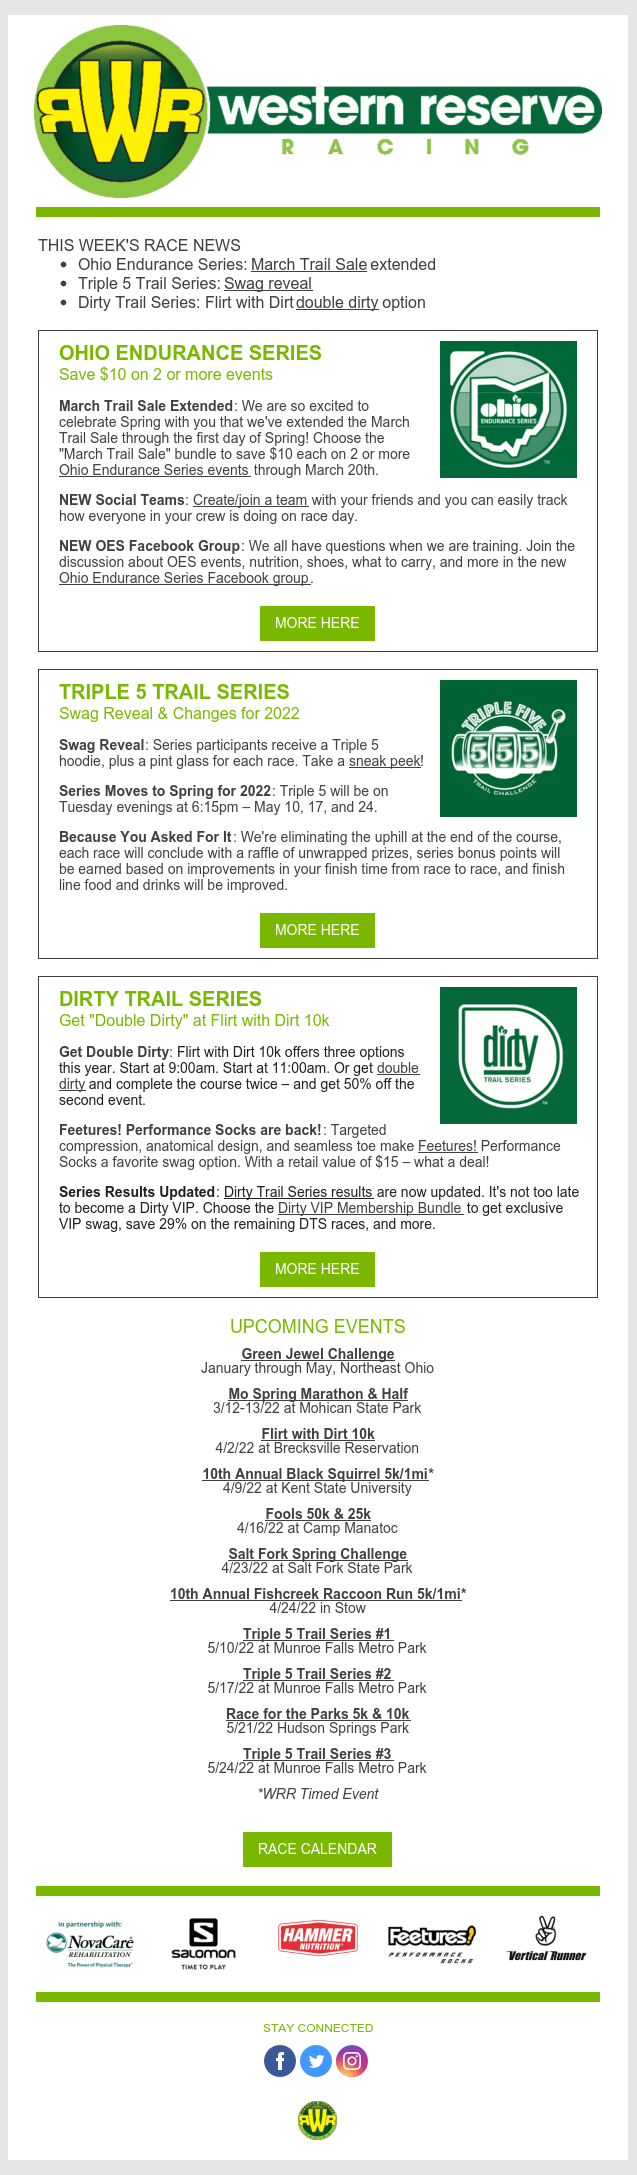 March Trail Sale Extended and Triple 5 Series Swag Revealed